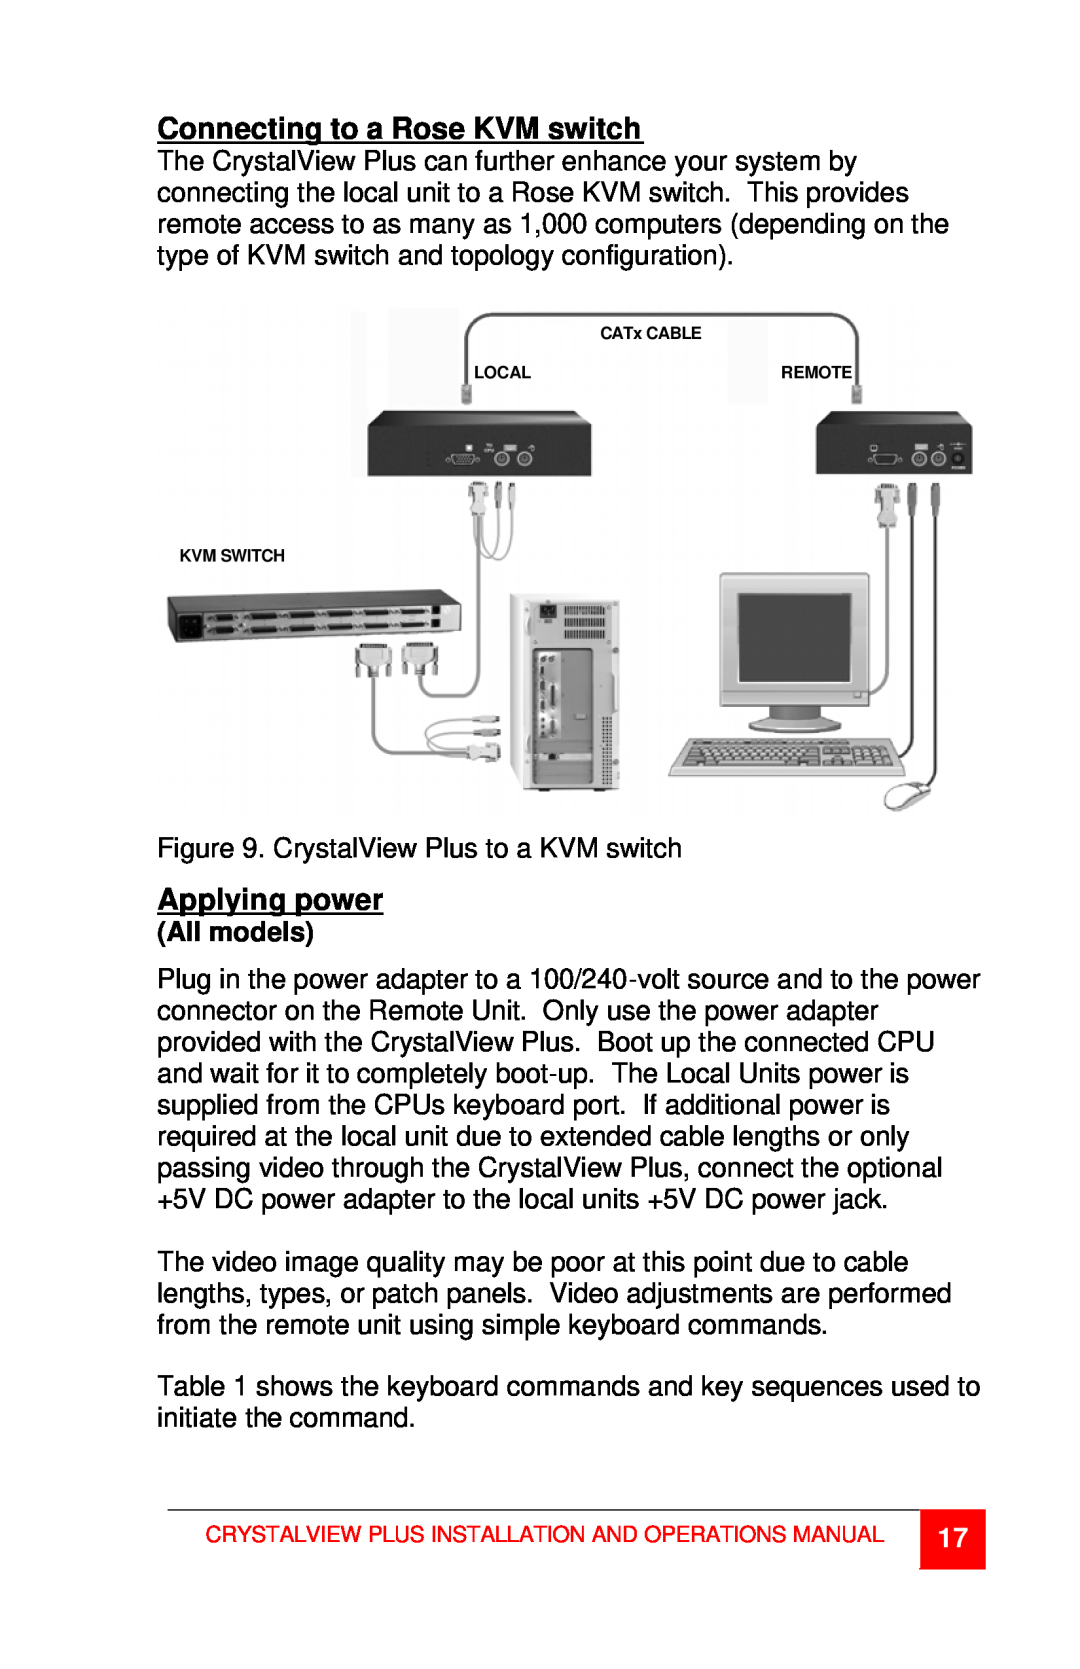 Rose electronic CrystalView Plus manual Connecting to a Rose KVM switch, Applying power, All models 